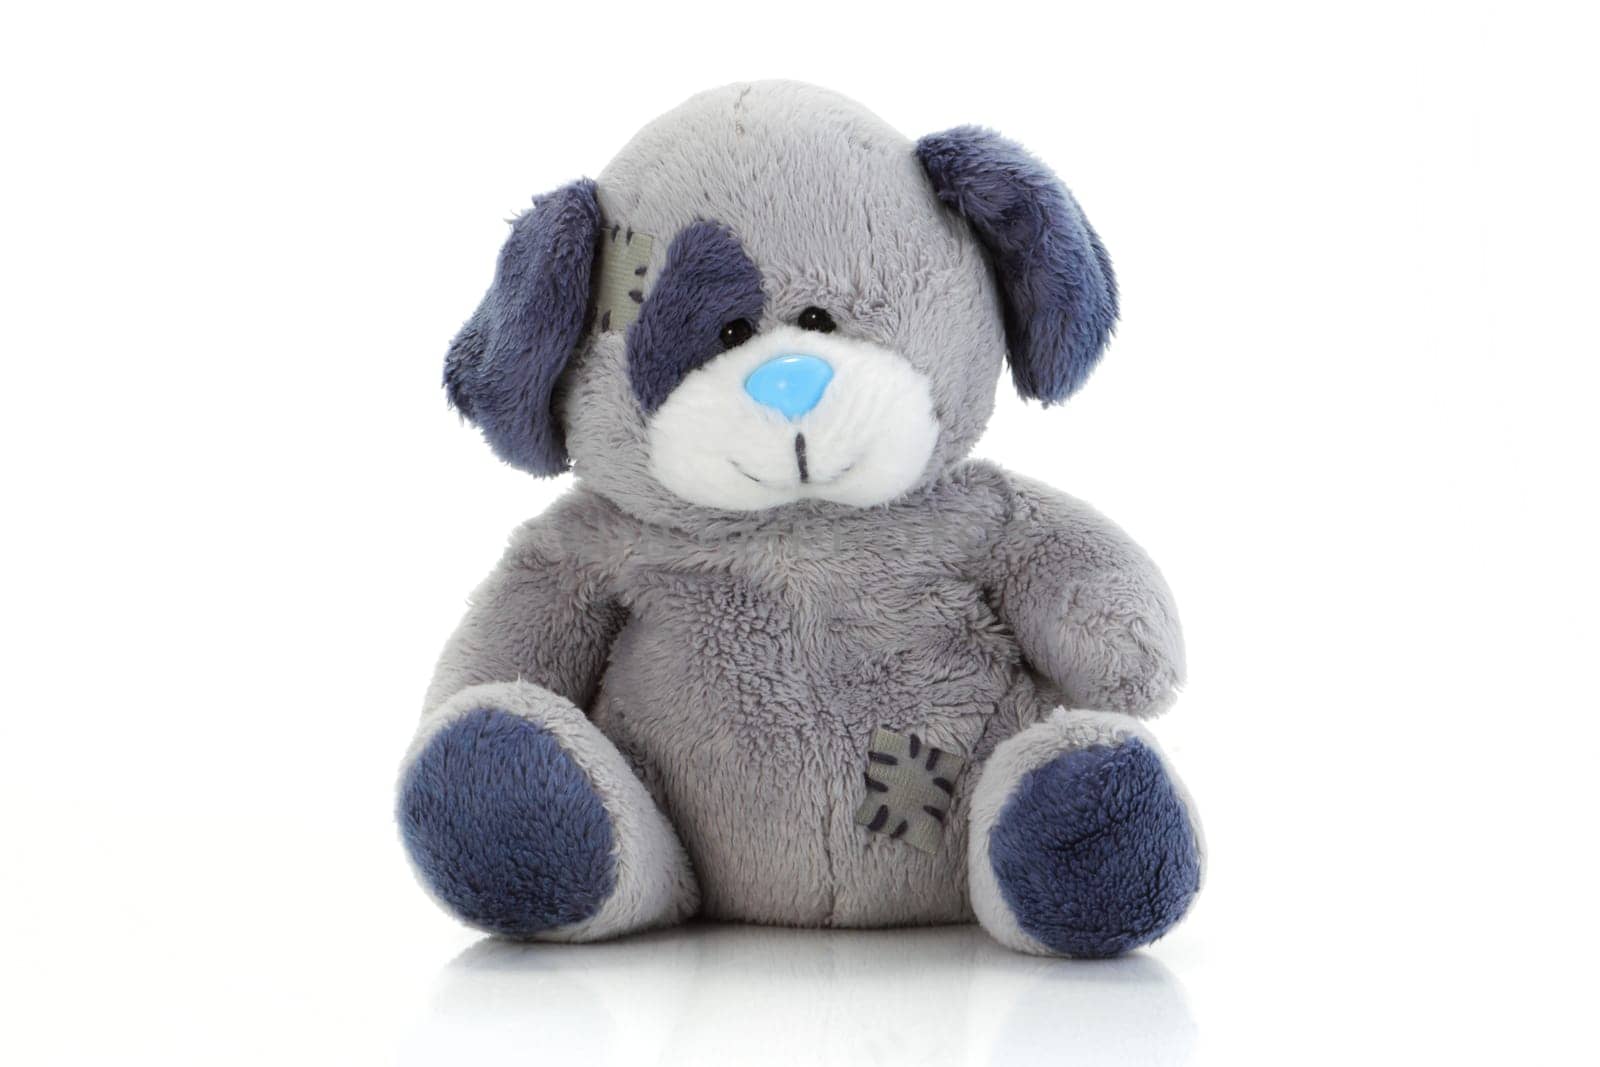 Teddy Bear grey and blue by VivacityImages